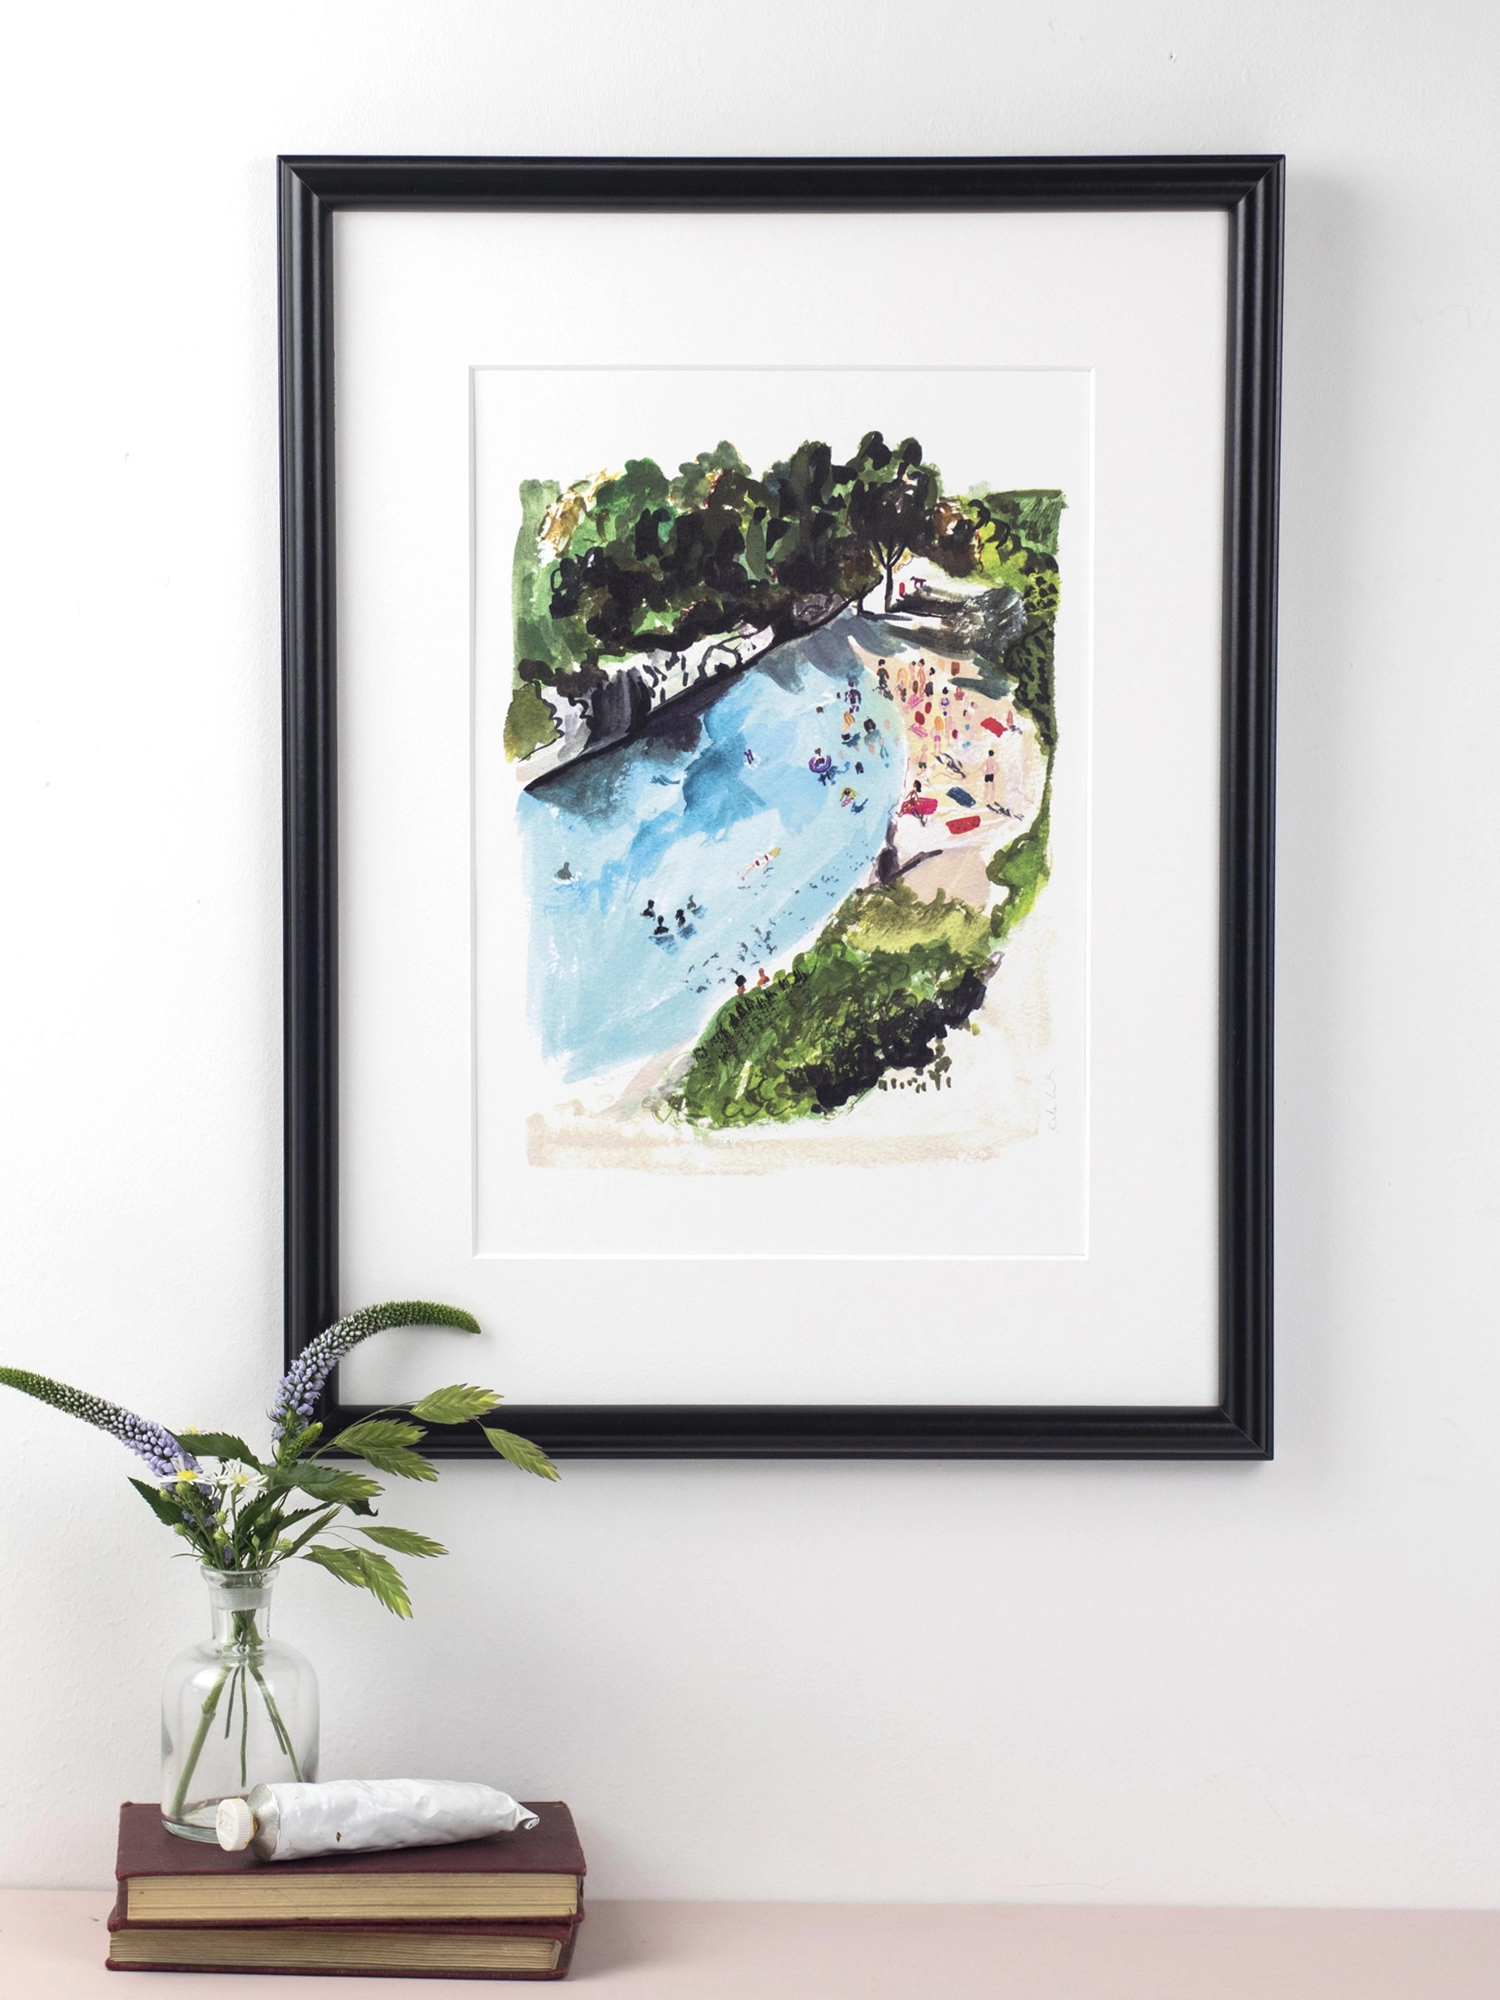 An art print featuring an observational drawing of a rocky beach in France. The small cove is full of people sunbathing and surrounded by trees. There are a few people in the water swimming.